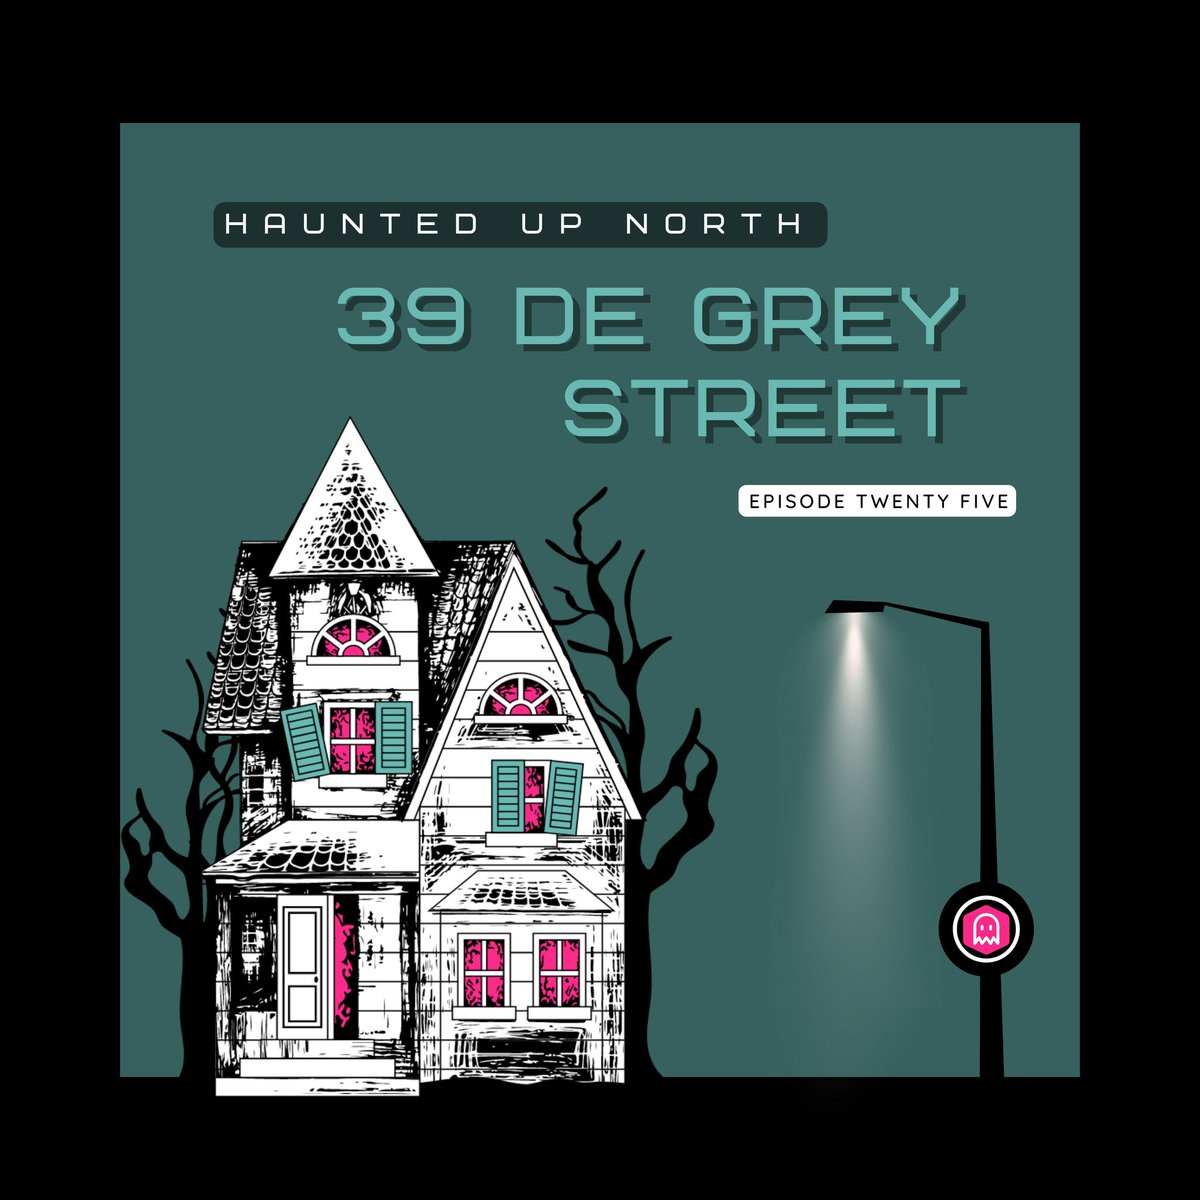 3 9  D E  G R E Y  S T R E E T  🏚️👻🏚️
Episode #25 drops this evening, & it's all about one of the UK's most notoriously #hauntedhouses... #39DeGreyStreet in the #EastYorkshire City of #Hull! Big shout-out to @jossv & @Helen909King
for all their amazing support! @TheDirtyBottles